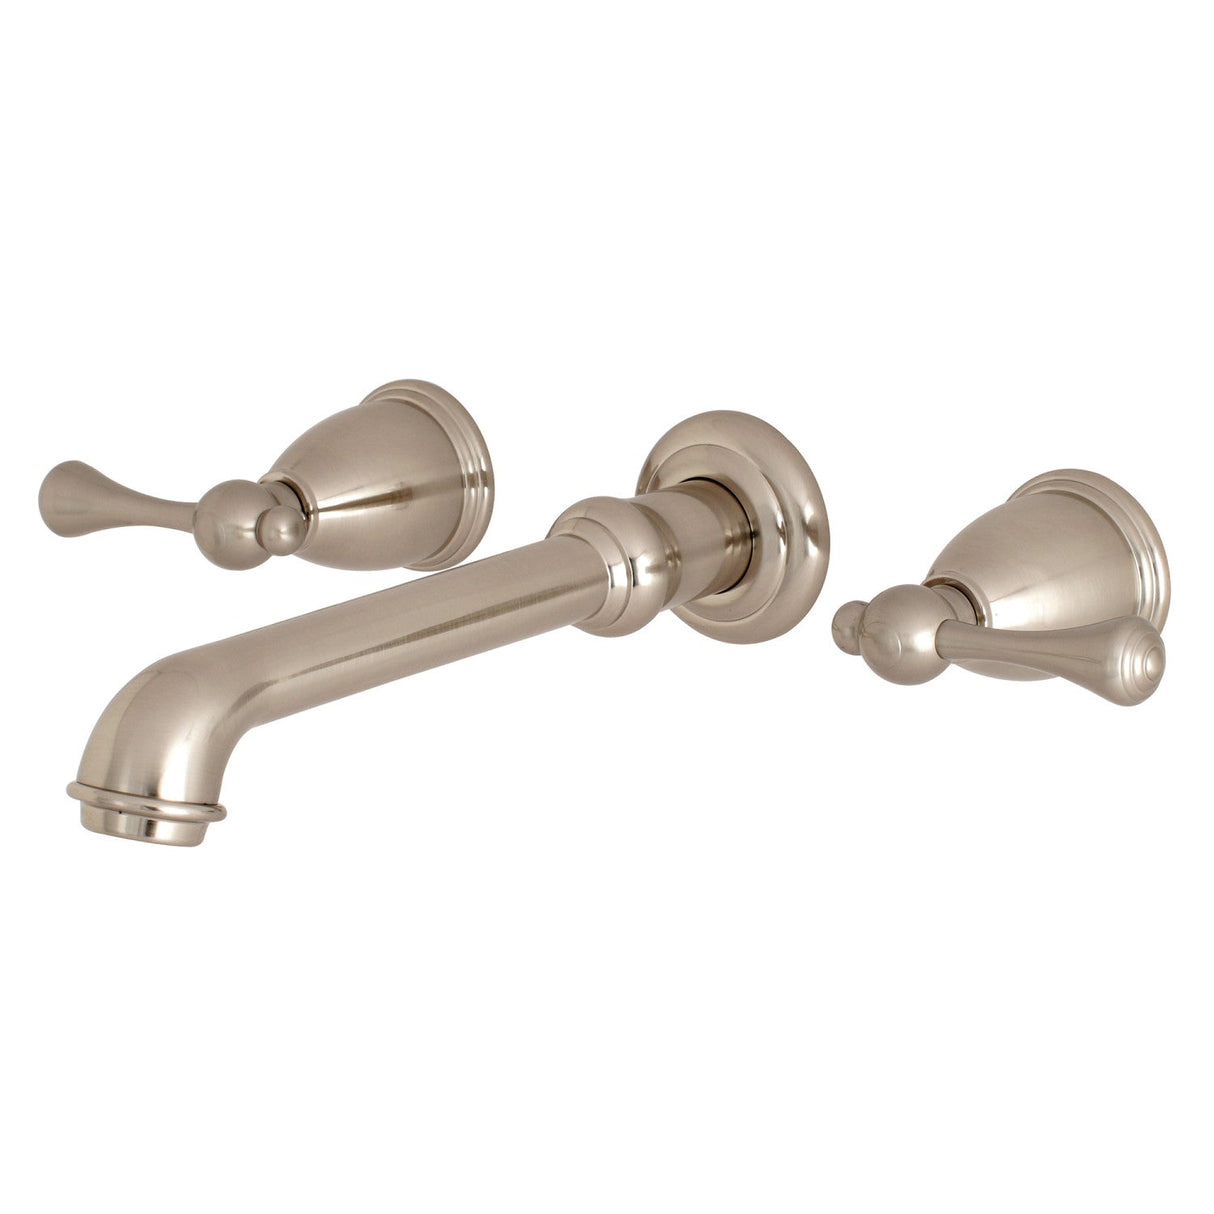 English Country KS7028BL Two-Handle 3-Hole Wall Mount Roman Tub Faucet, Brushed Nickel